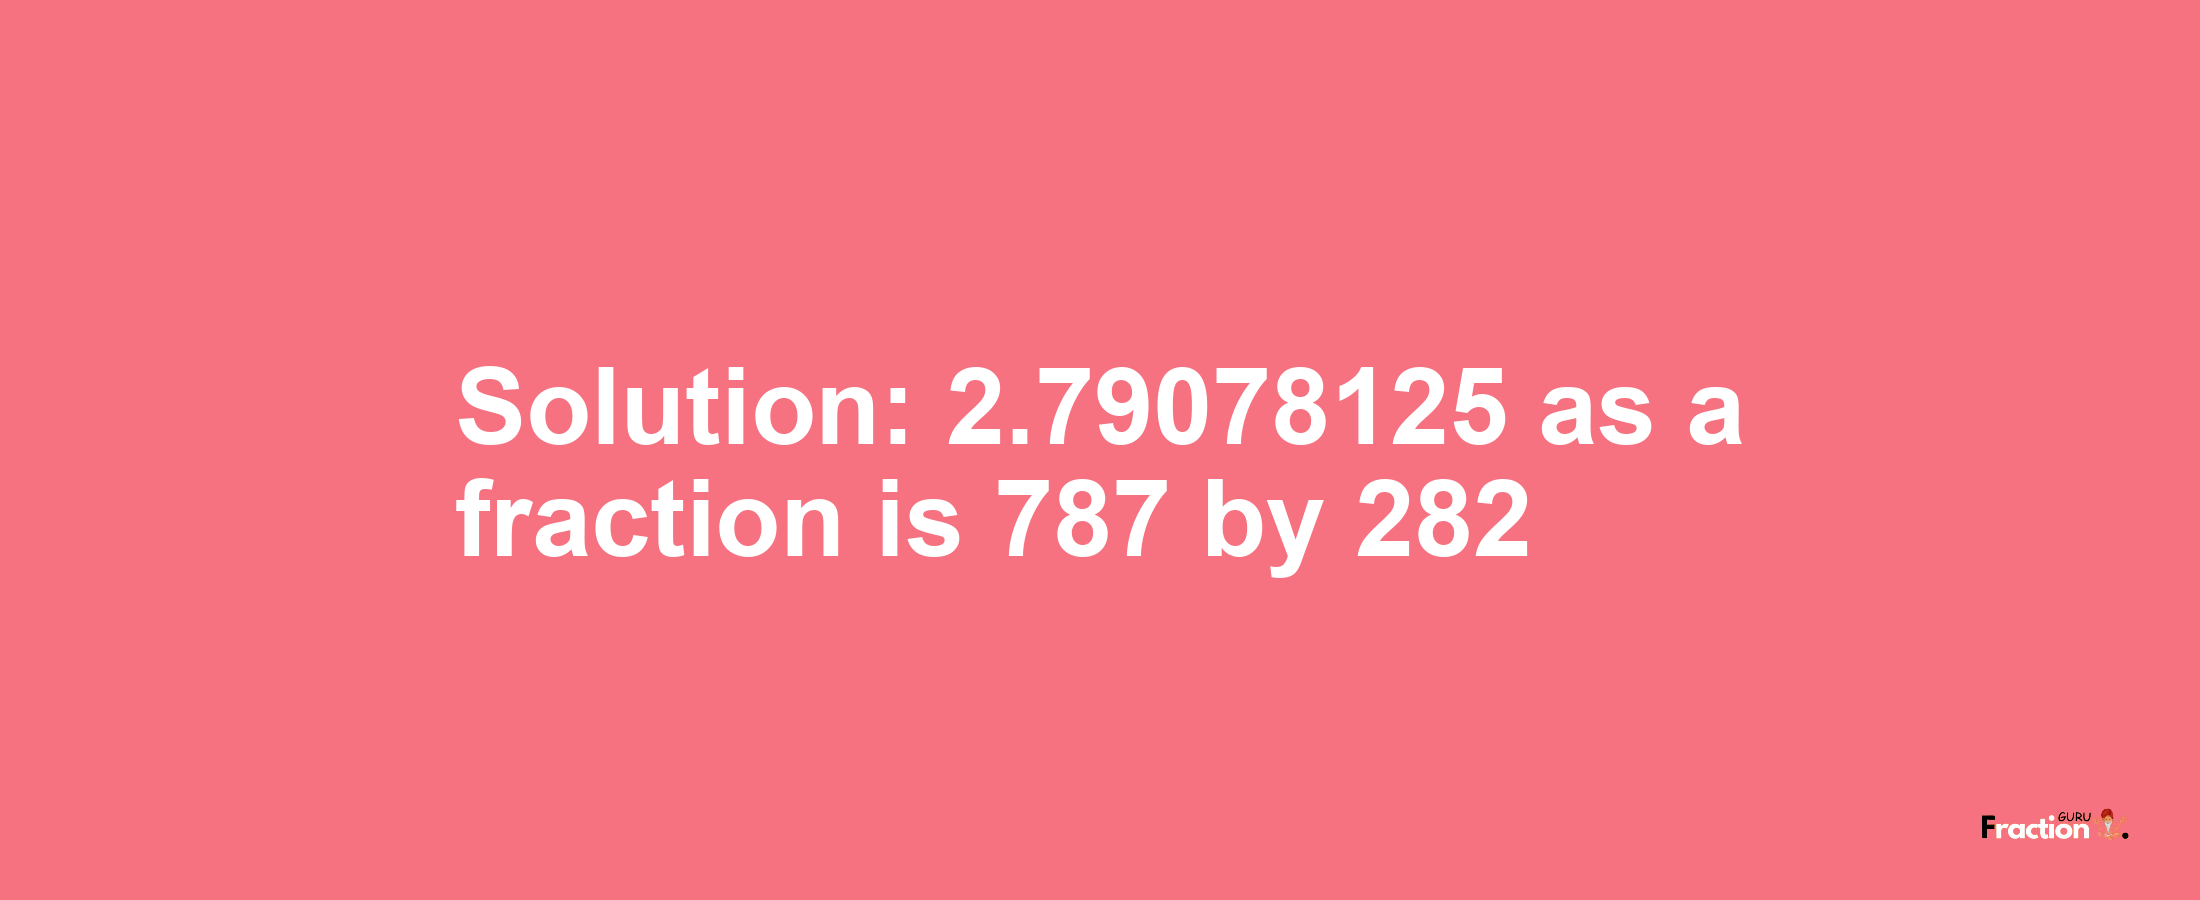 Solution:2.79078125 as a fraction is 787/282